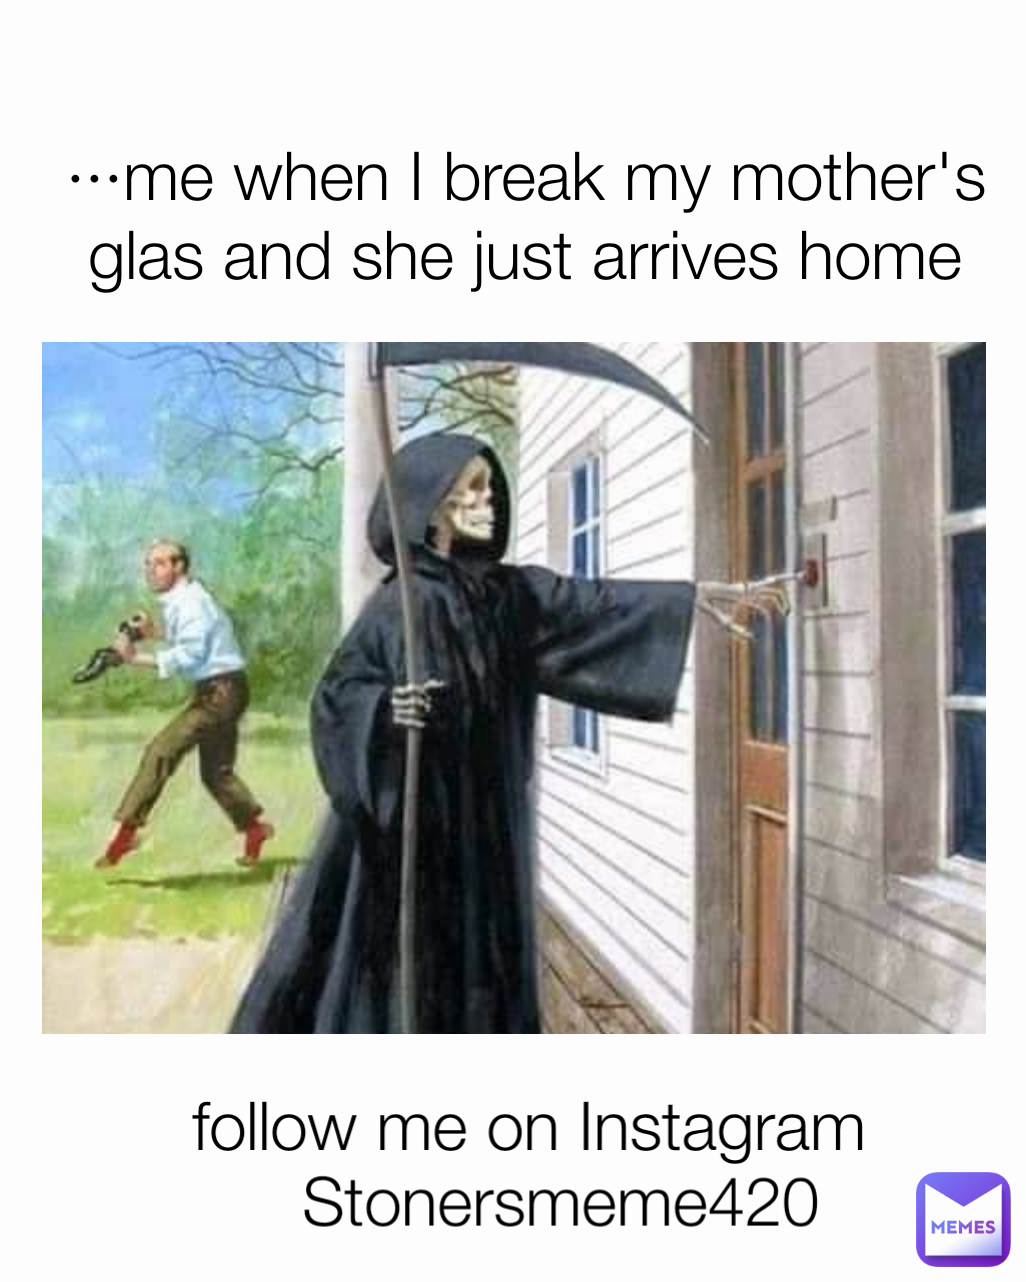 follow me on Instagram Stonersmeme420 ···me when I break my mother's glas and she just arrives home